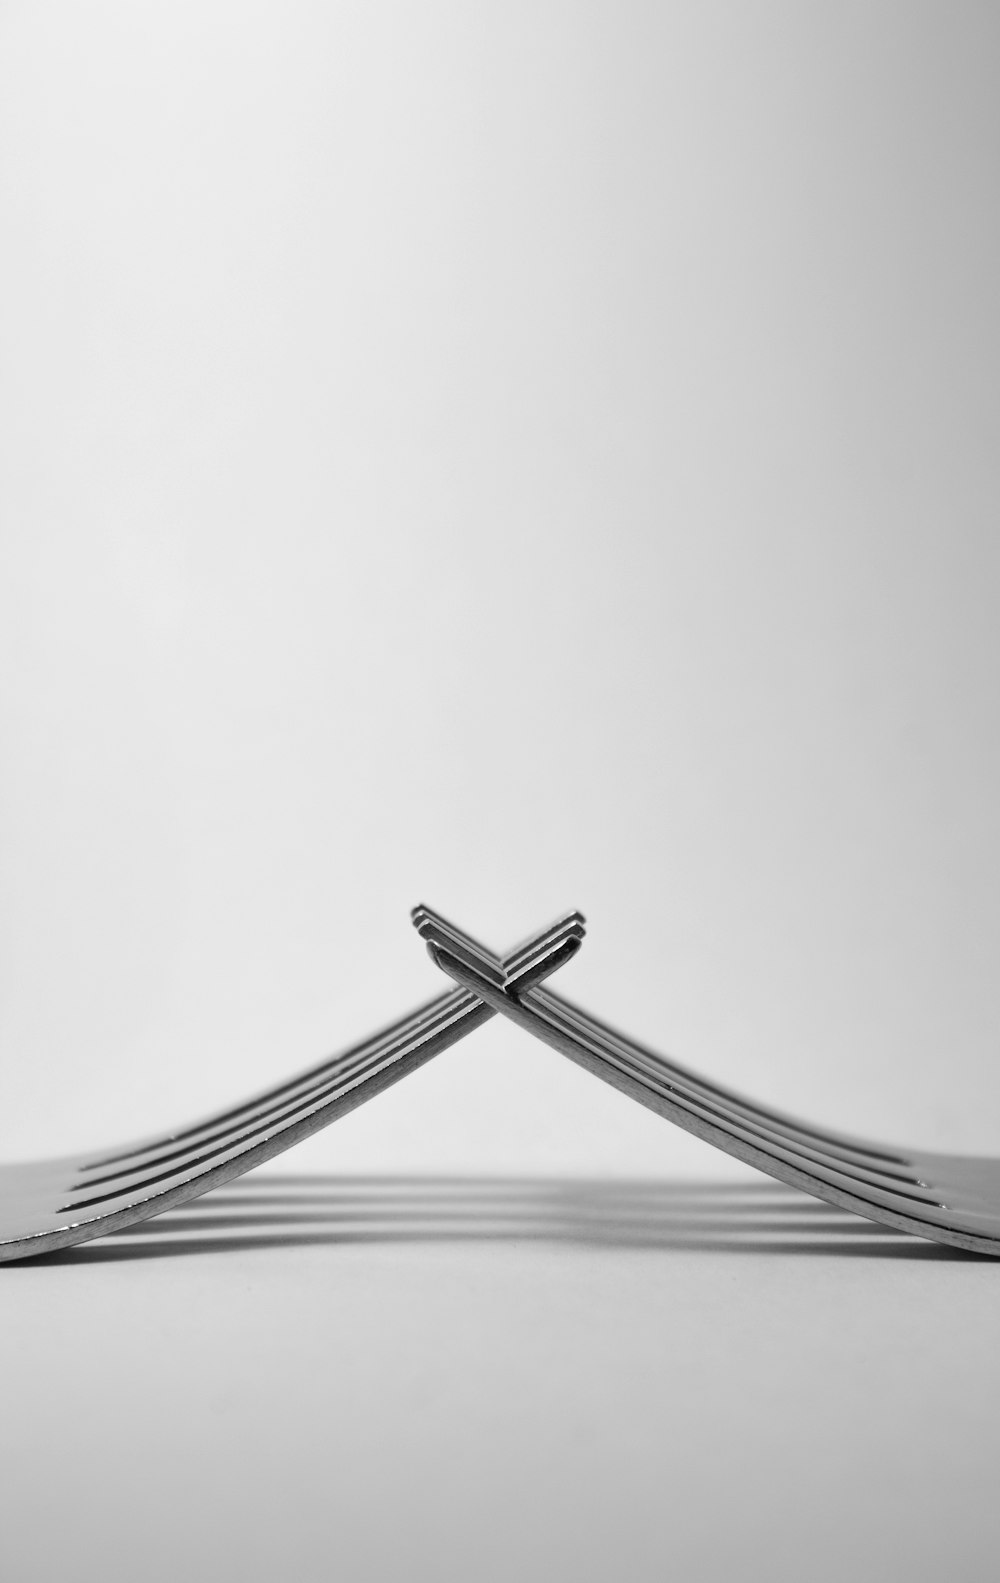 photo of stainless steel forks in white background